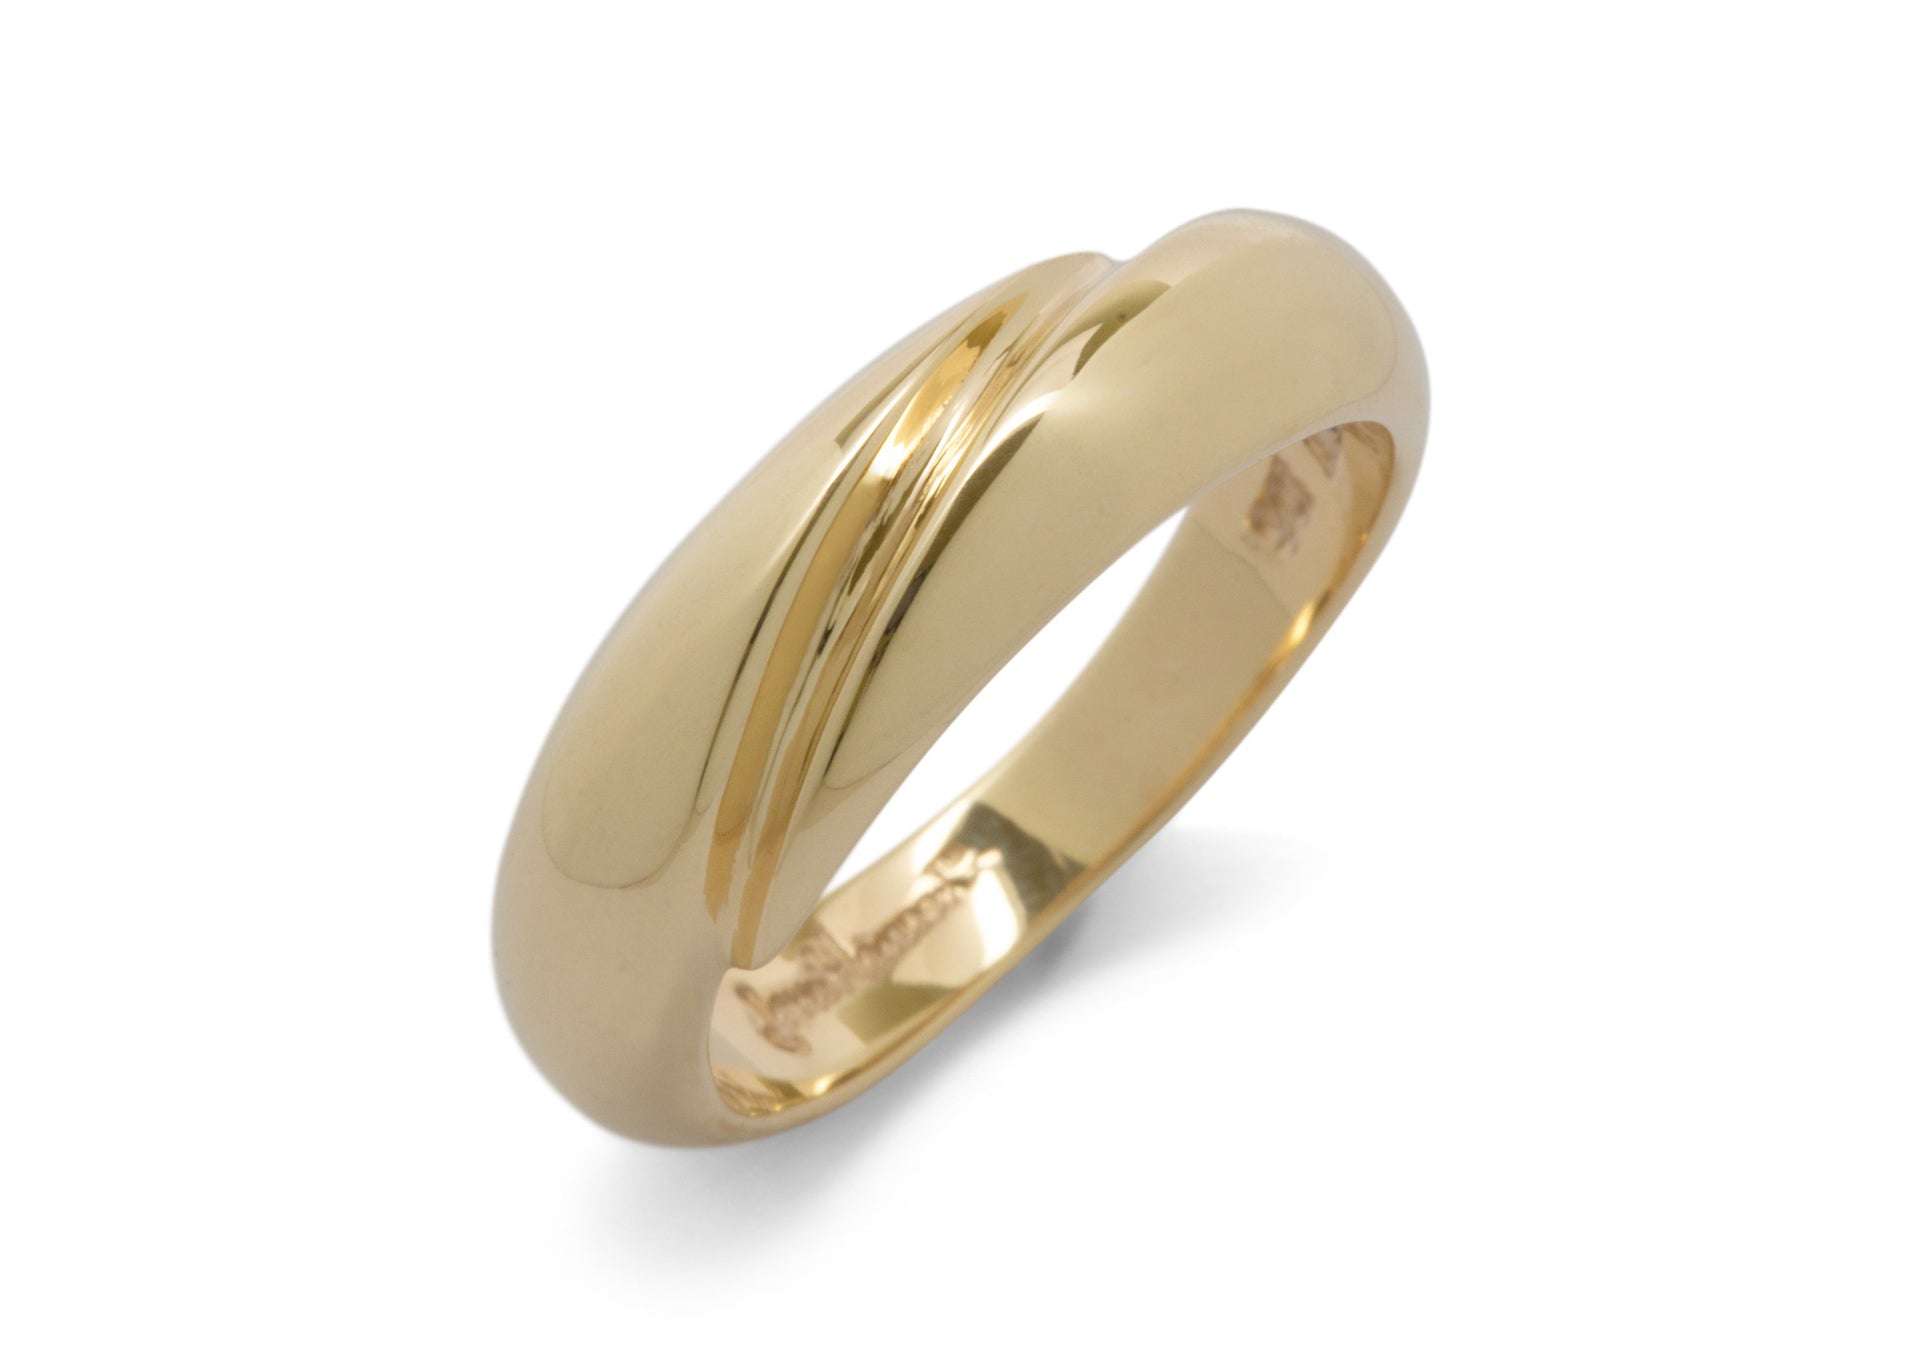 JW1 Domed Ring, Yellow Gold